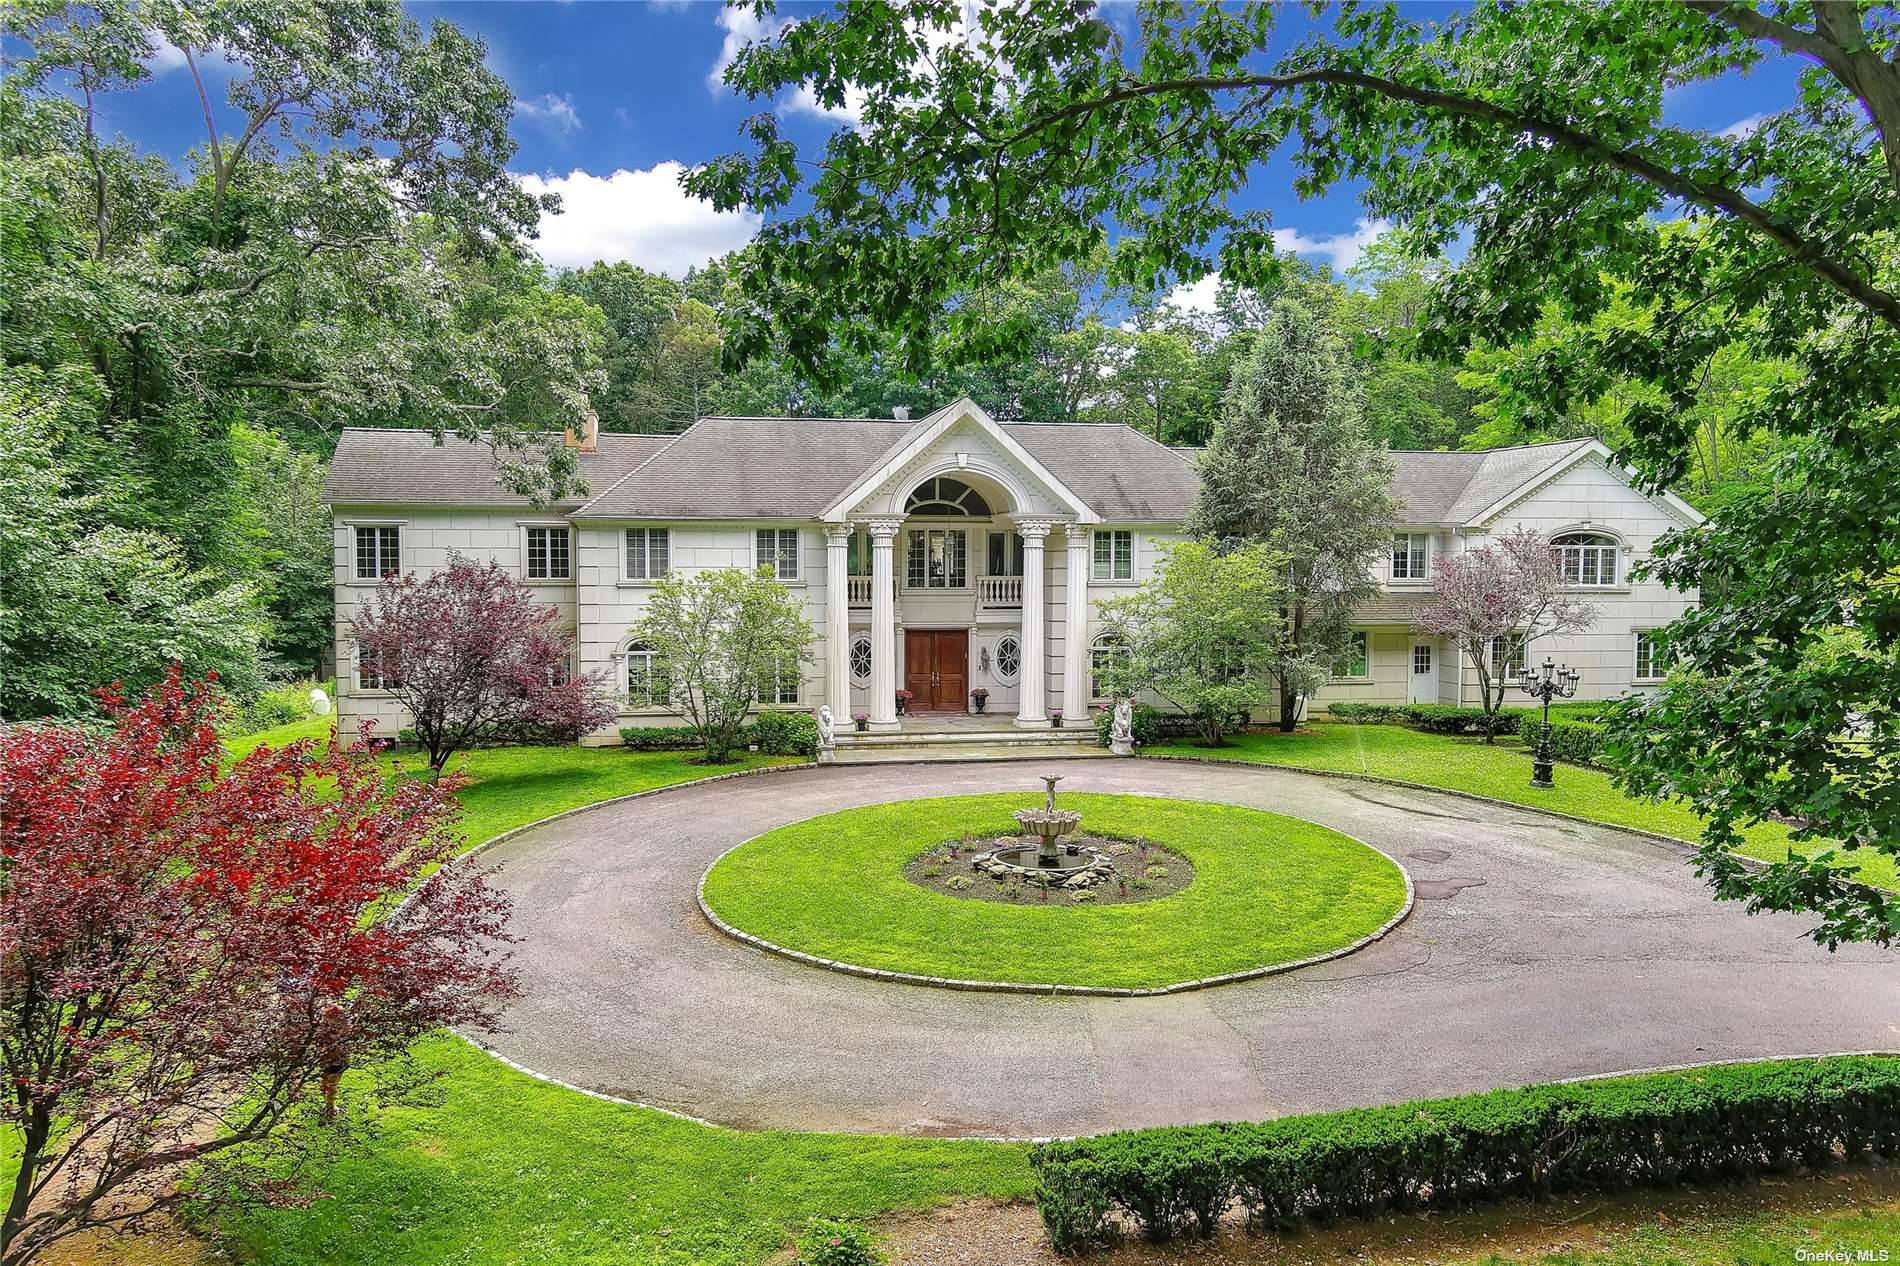 MILL NECK. Incredible Stone and Stucco Gated Colonial, Custom Built and Located on Over 5 Private, Beautiful and Wooded Acres, In the Heart of the Village of Mill Neck.